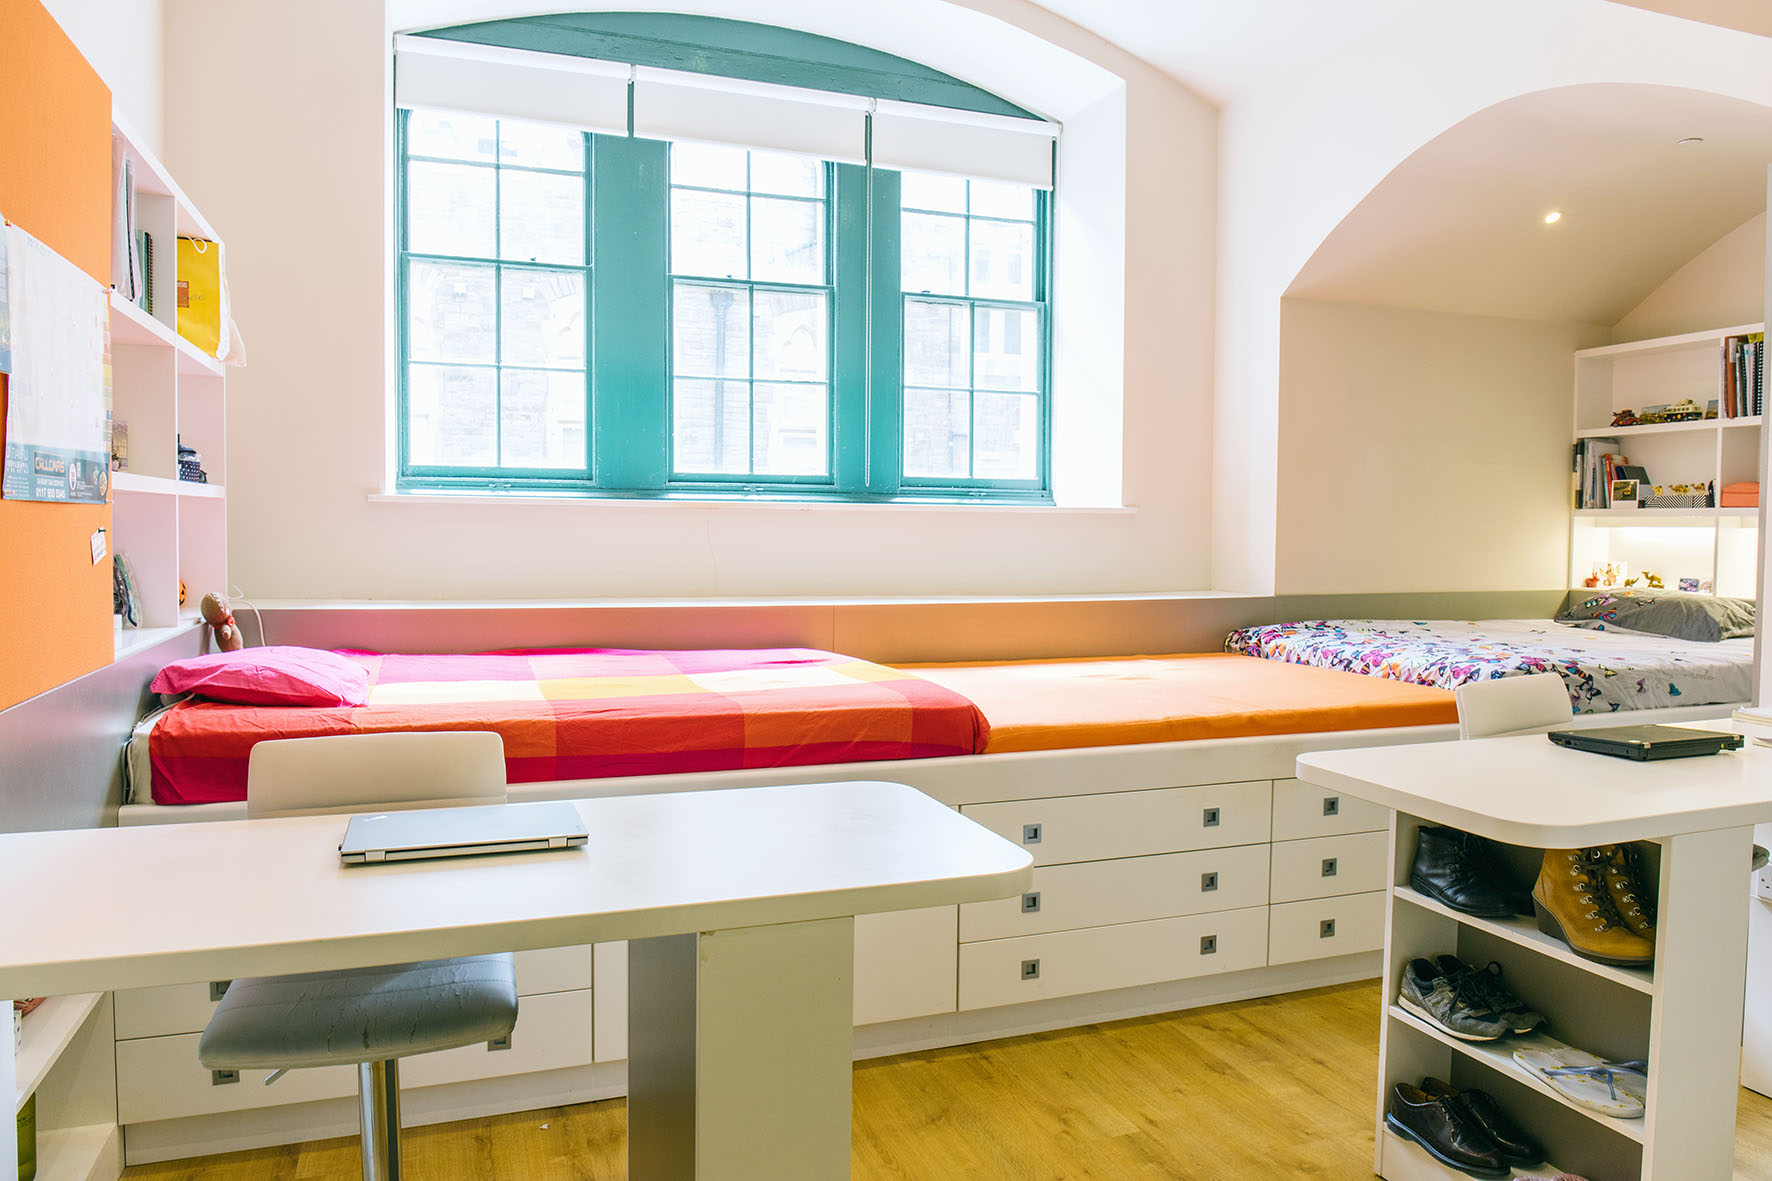 Premium Range 1 Twin room at Cathedral Park in Bristol, Unite Students accommodation